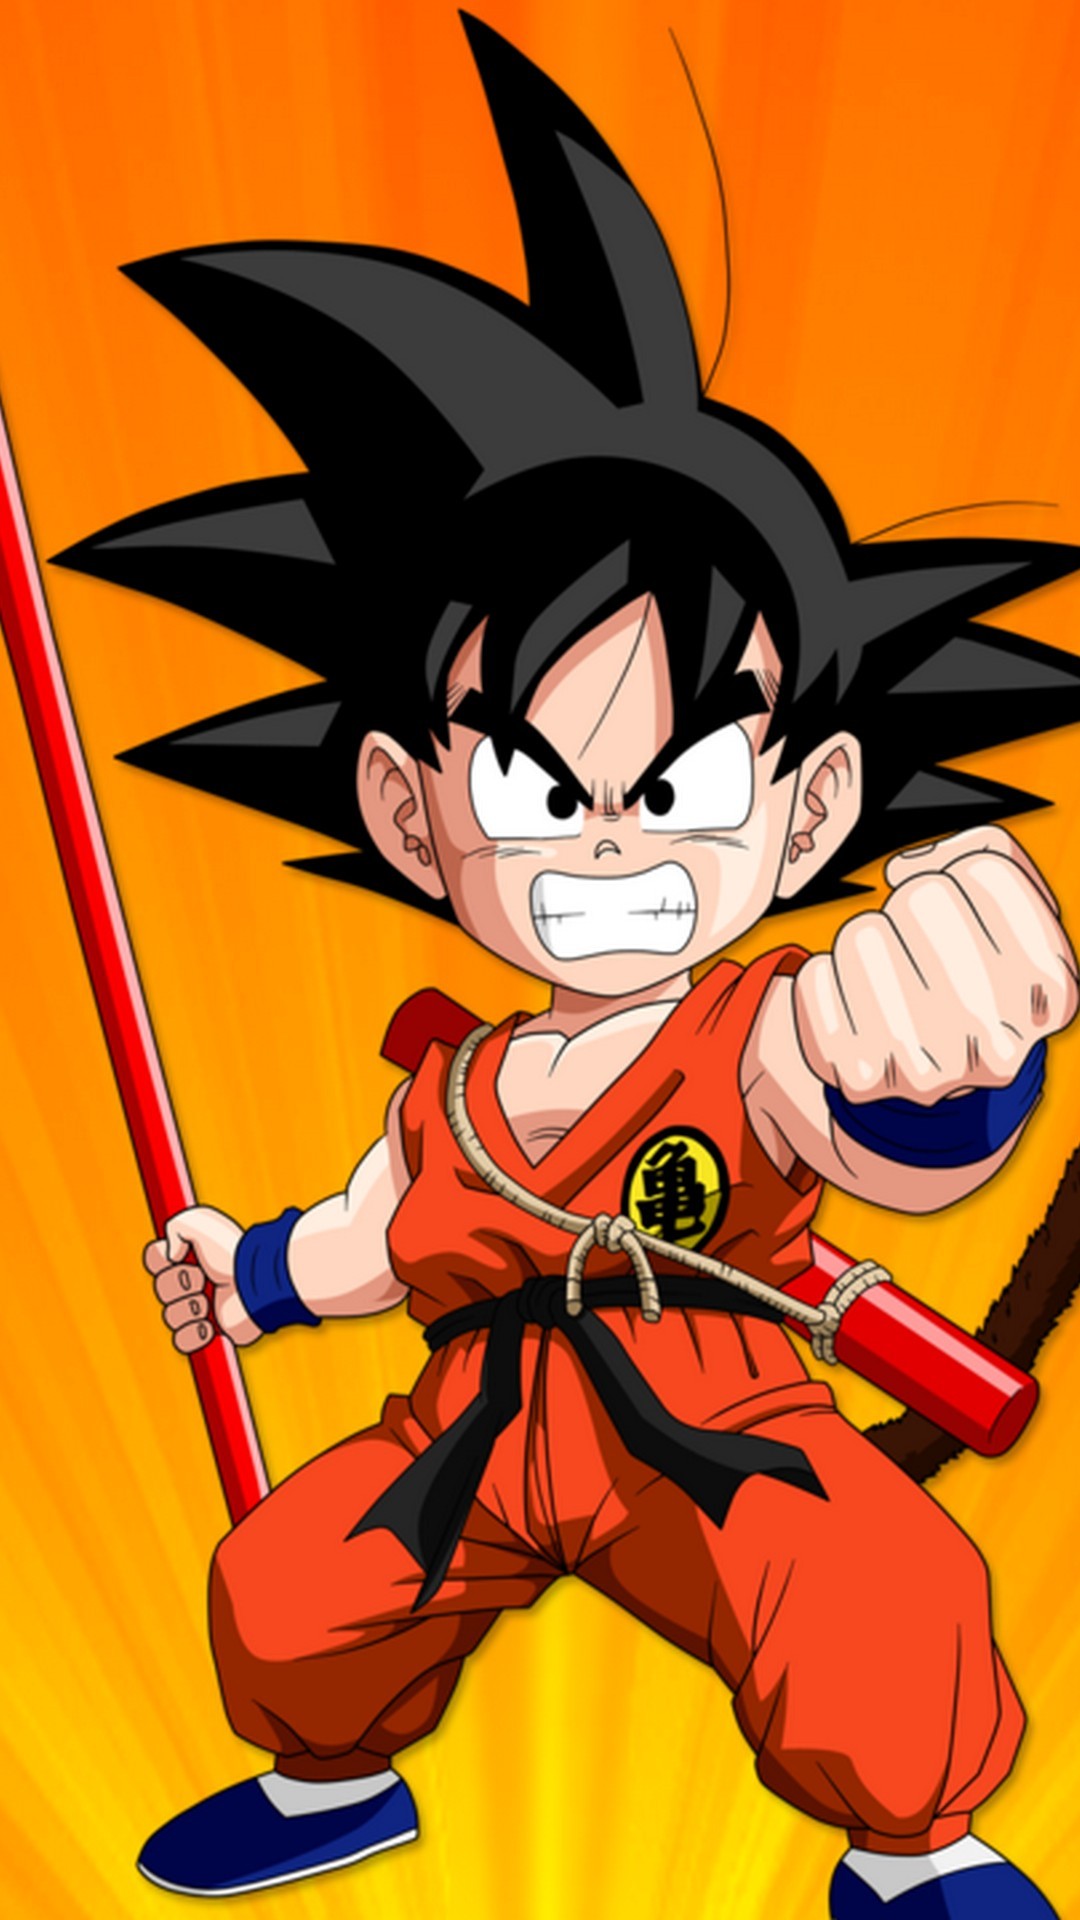 Kid Goku Wallpaper Android with HD resolution 1080x1920